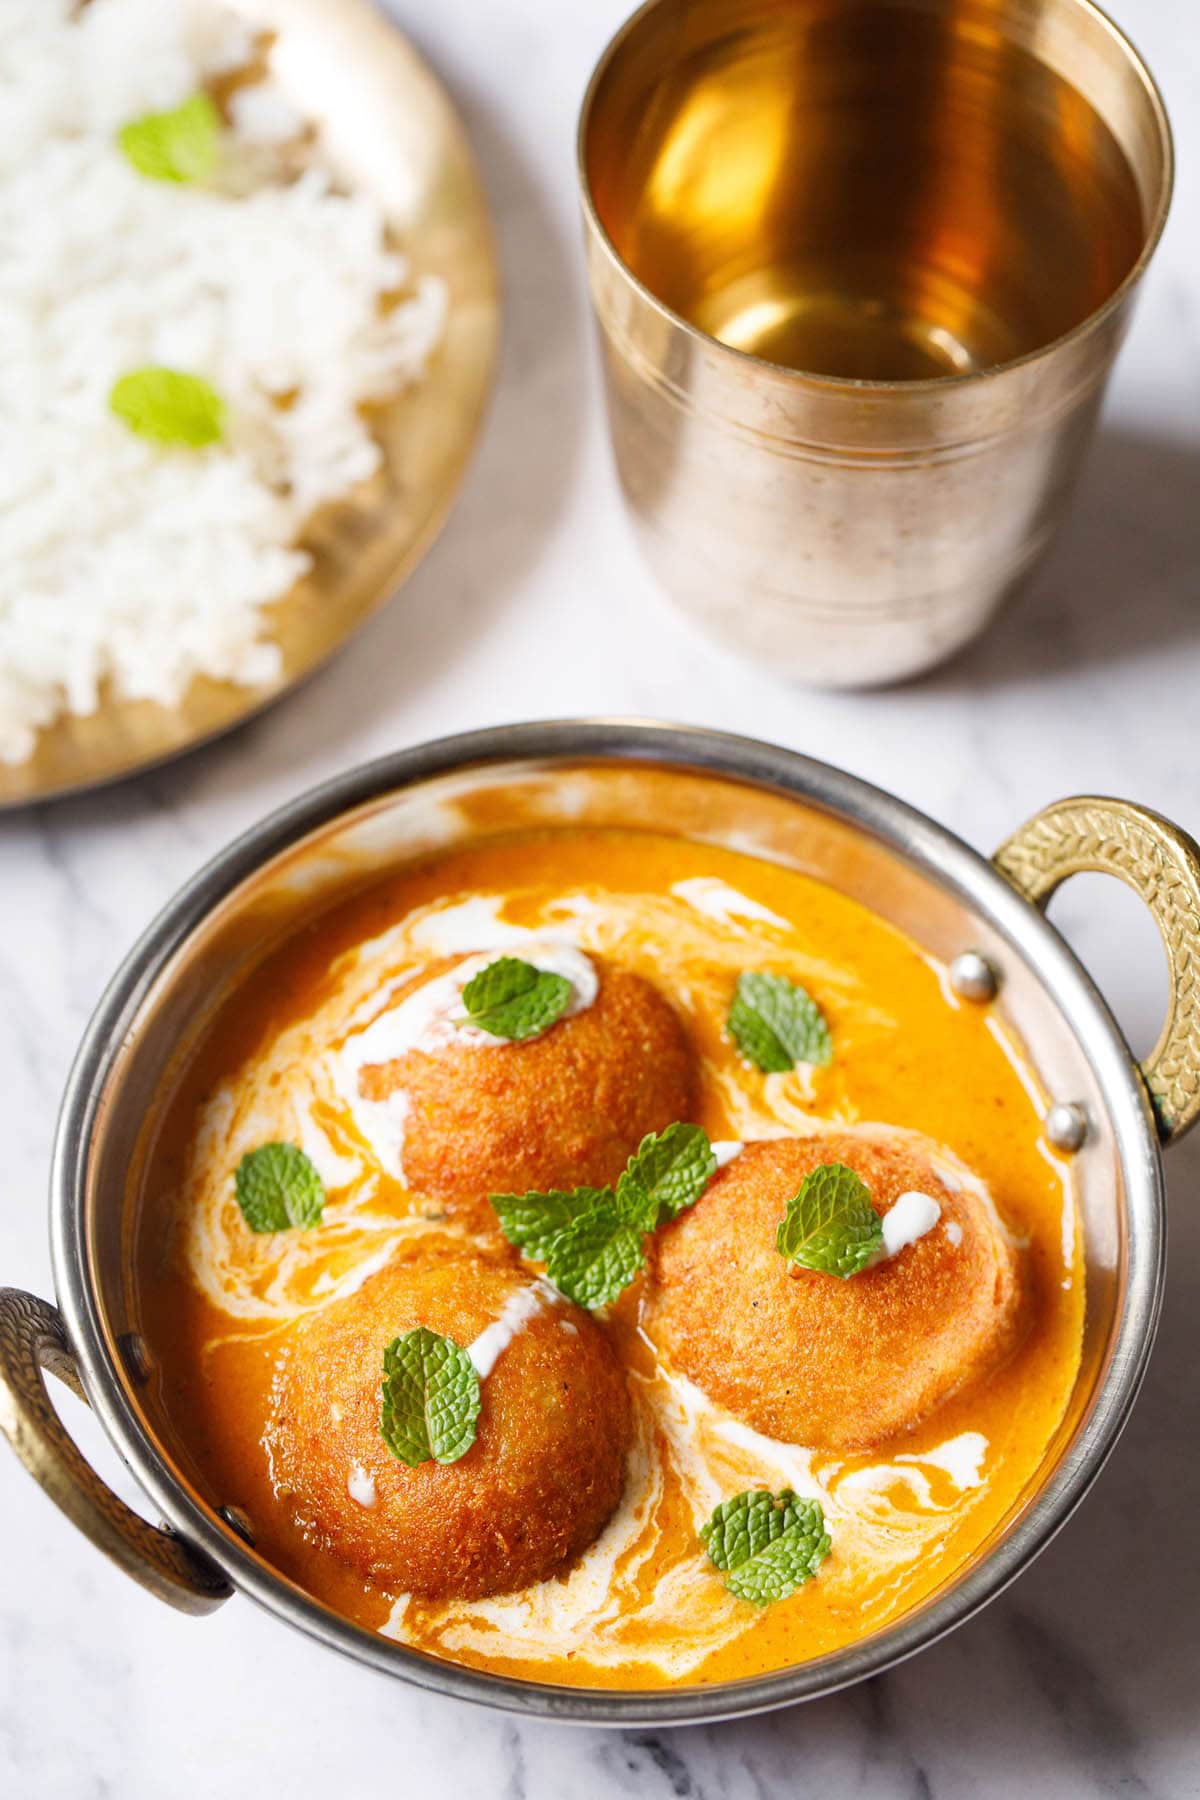 3 malai kofta garnished with mint leaves in a silver serving dish with handles on a white marble